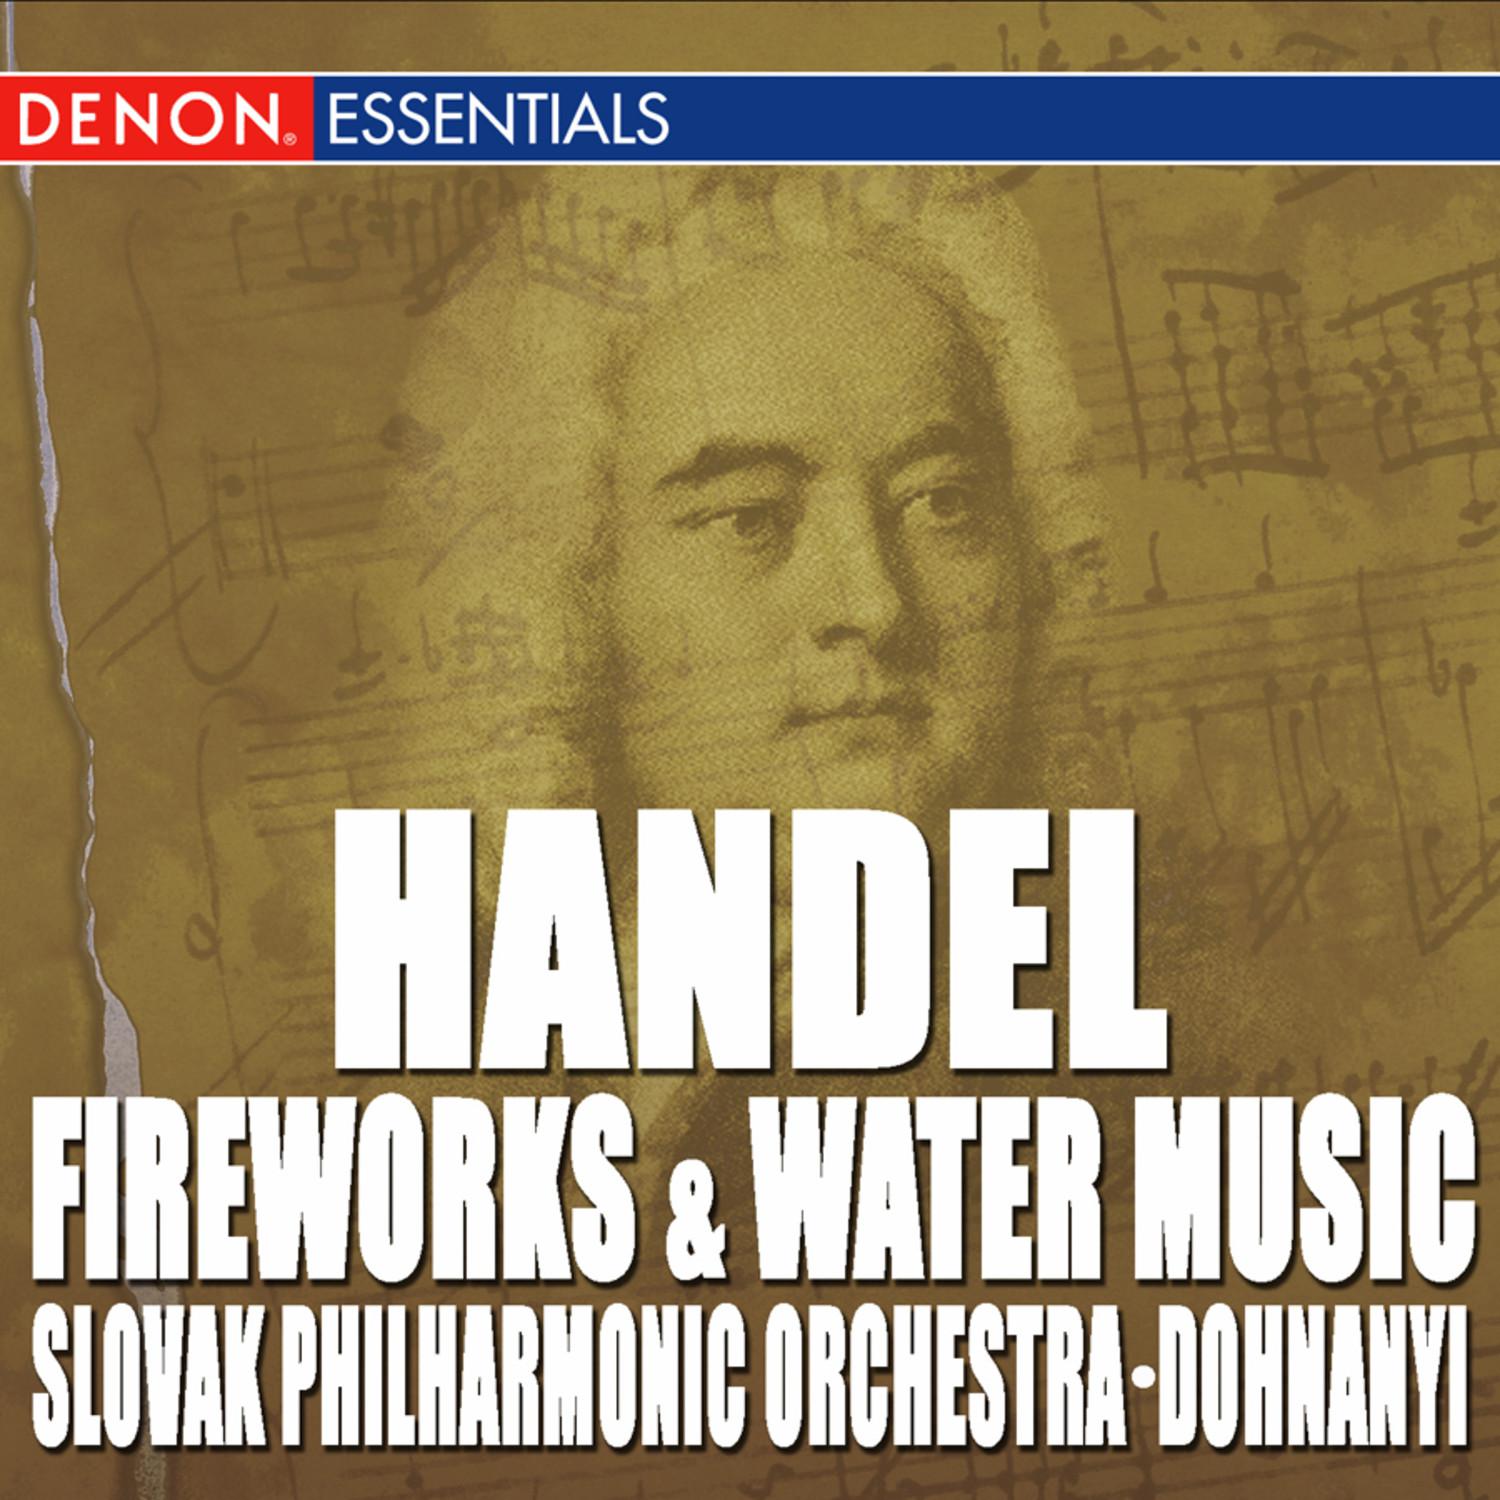 Water Music Suite No. 2 in D, HWV 349: IV. Andante, Allegro